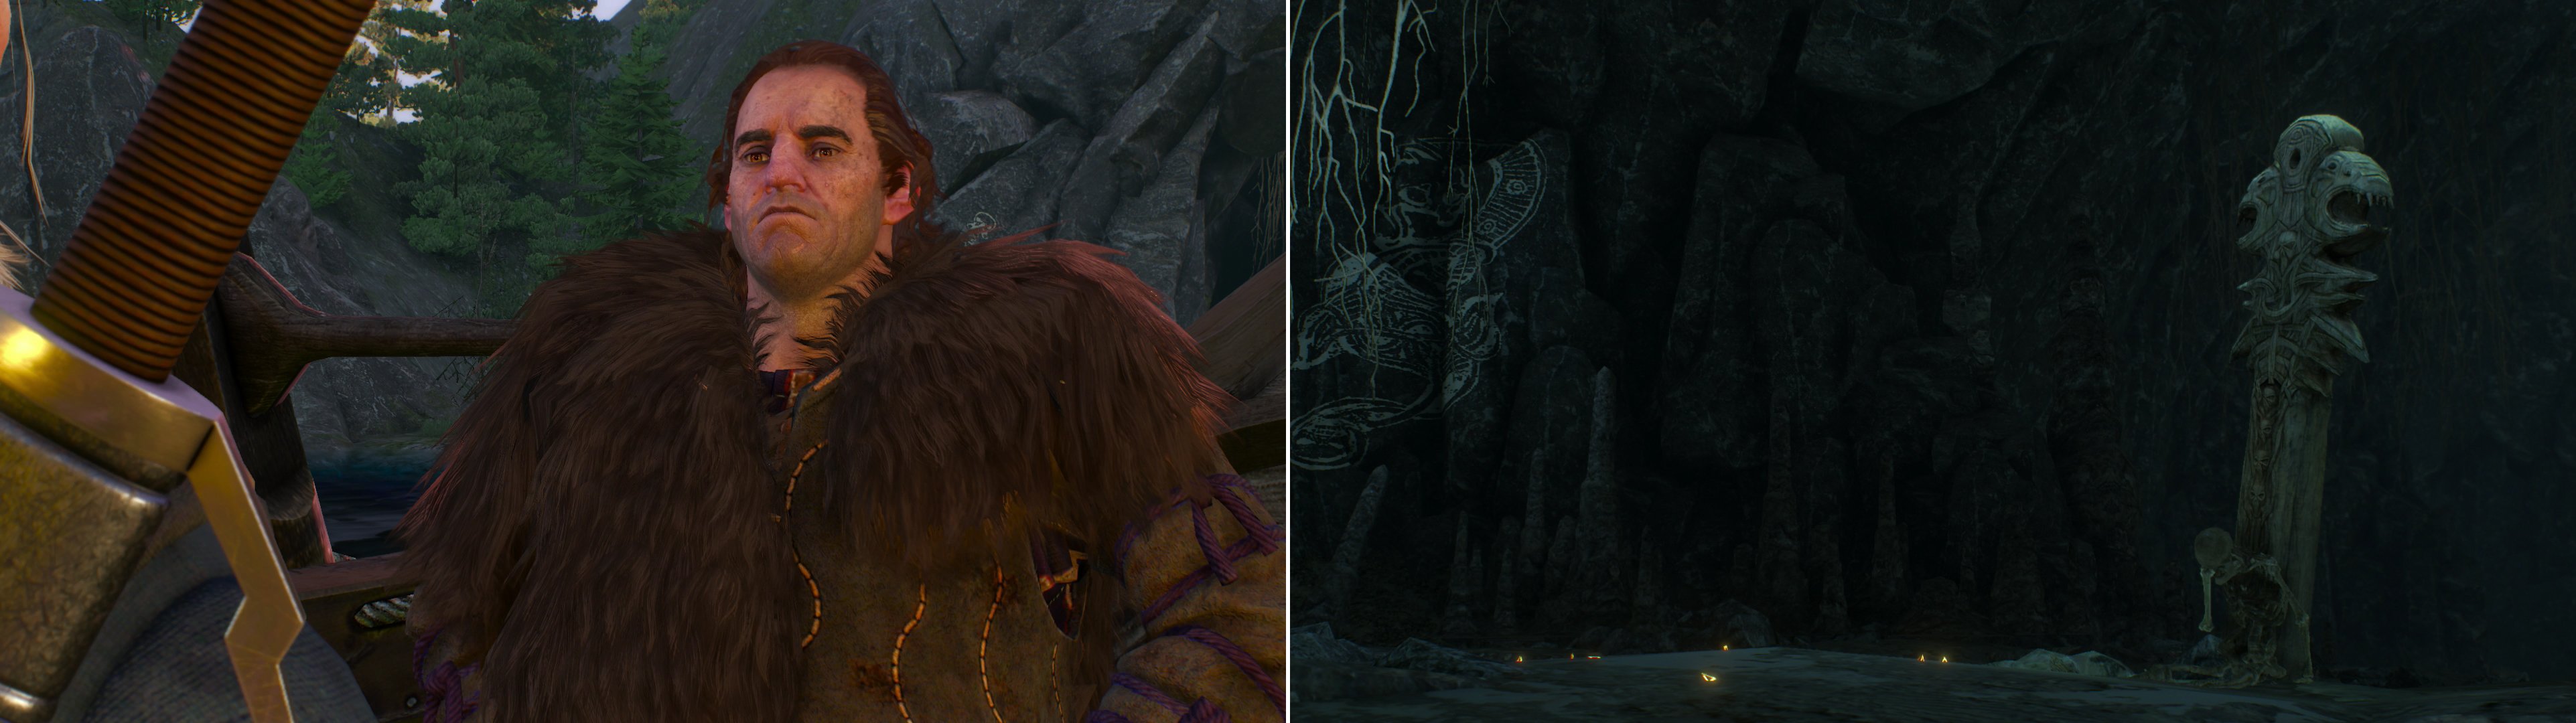 Meet with Blueboy Lugos near the Cave of Dreams (left) then enter the cave and drink a concoction near a totem (right).